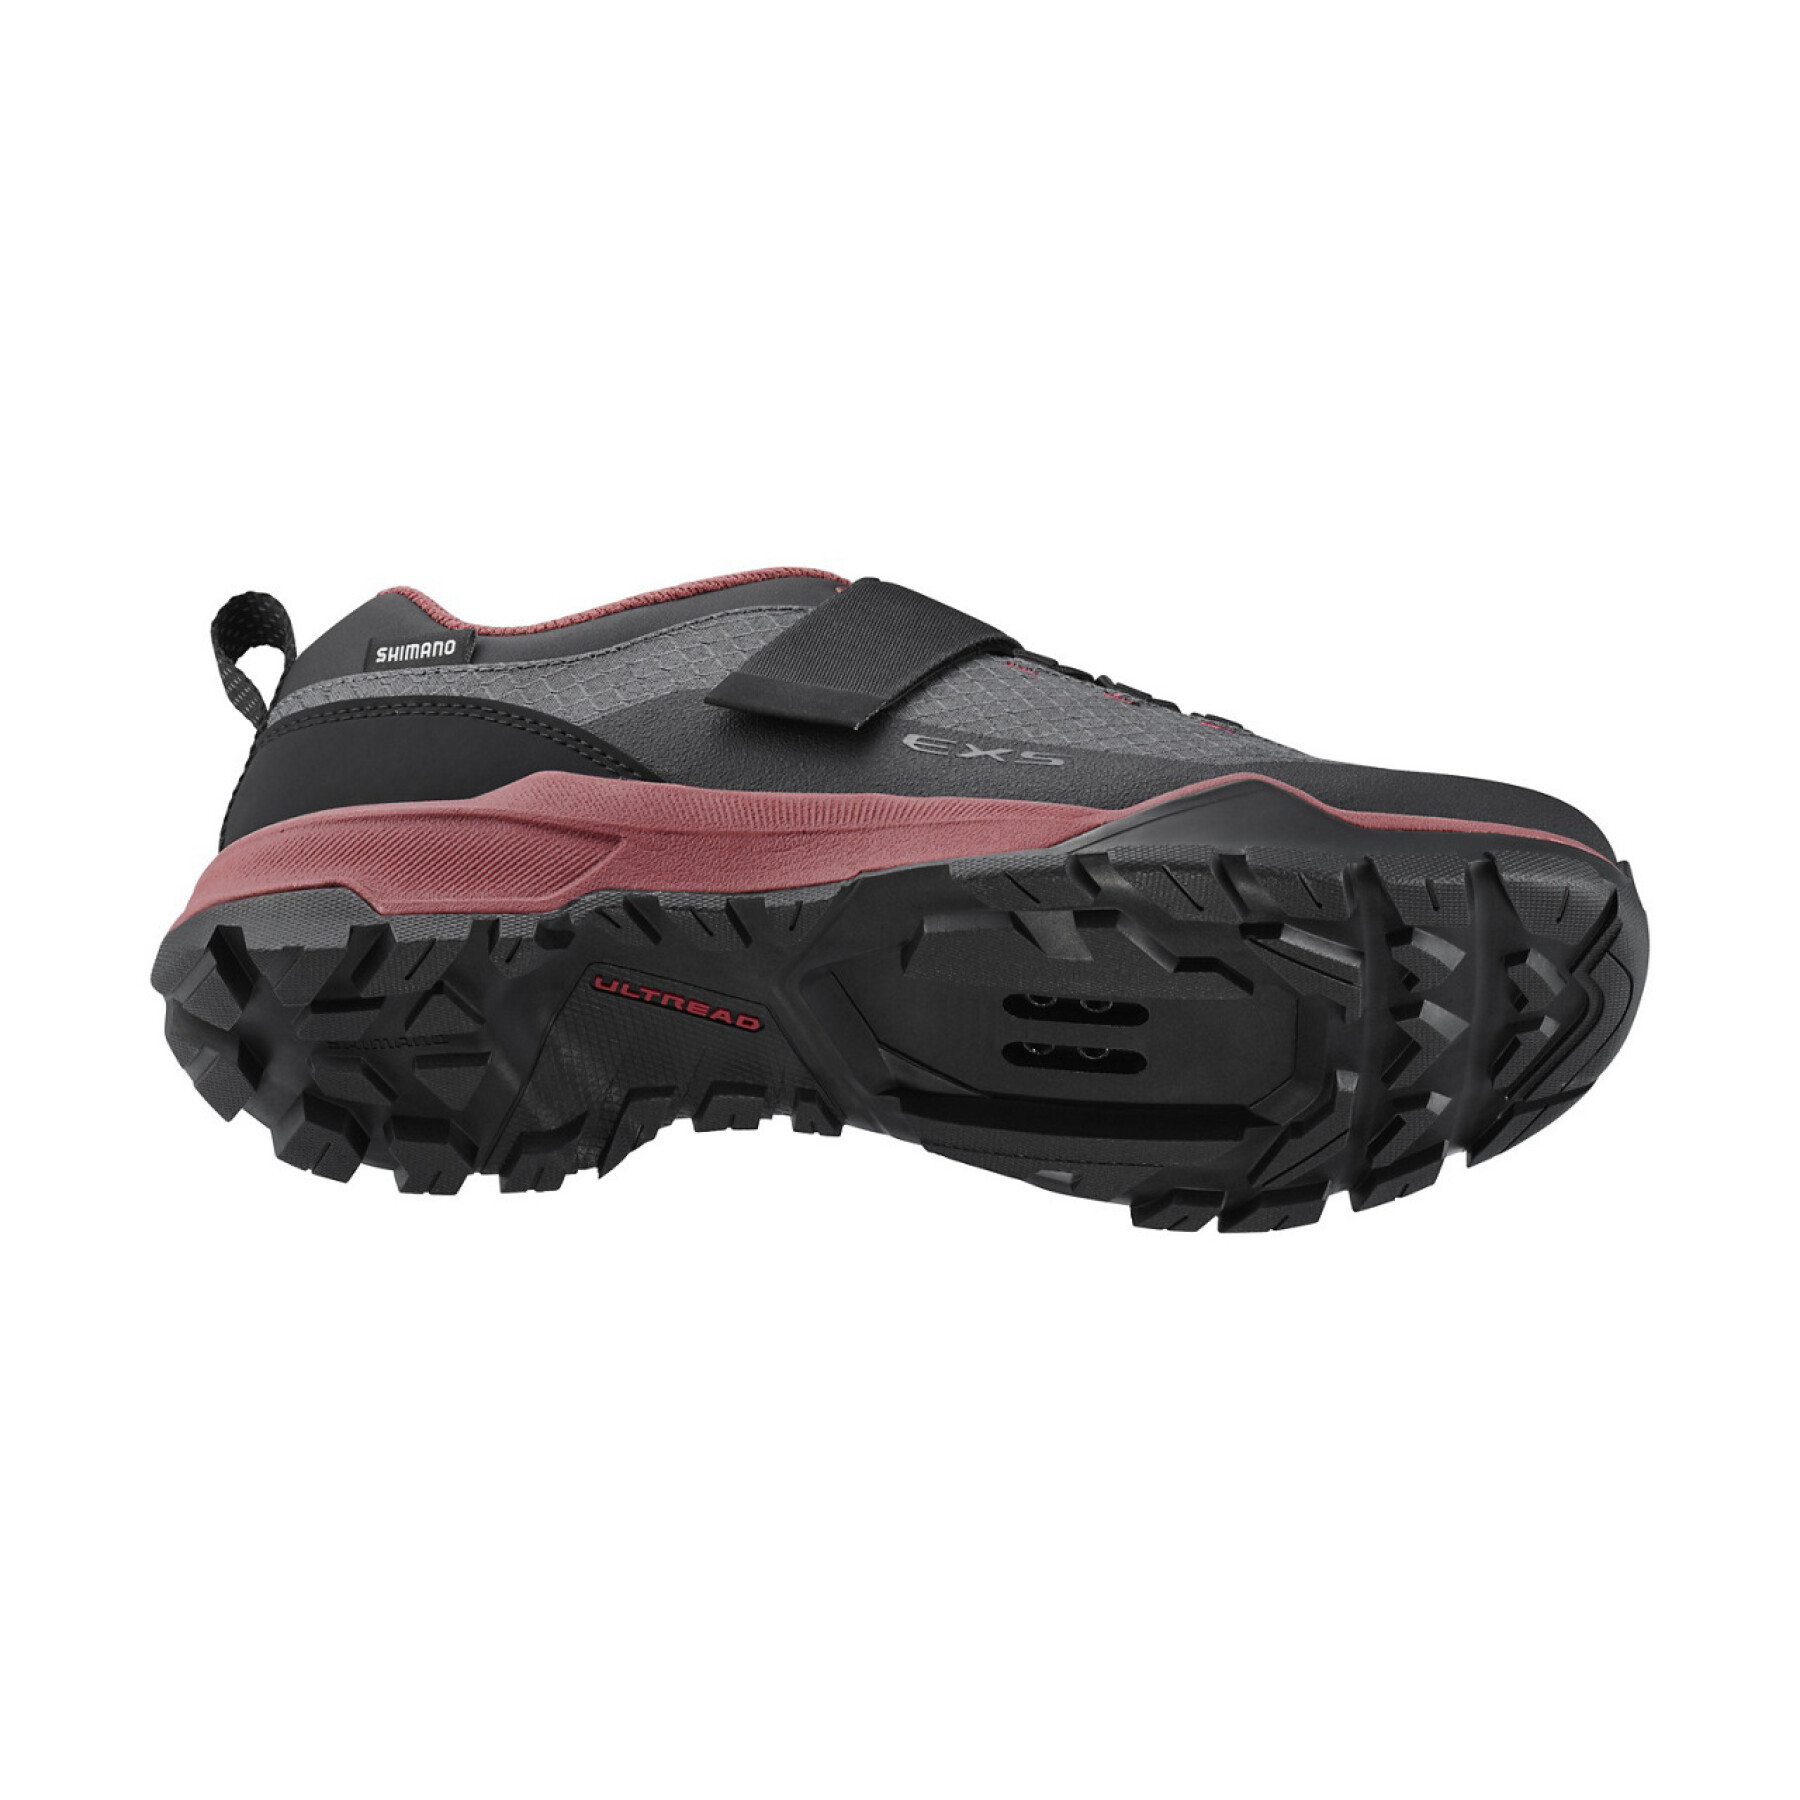 Chaussures femme Shimano SH-EX500